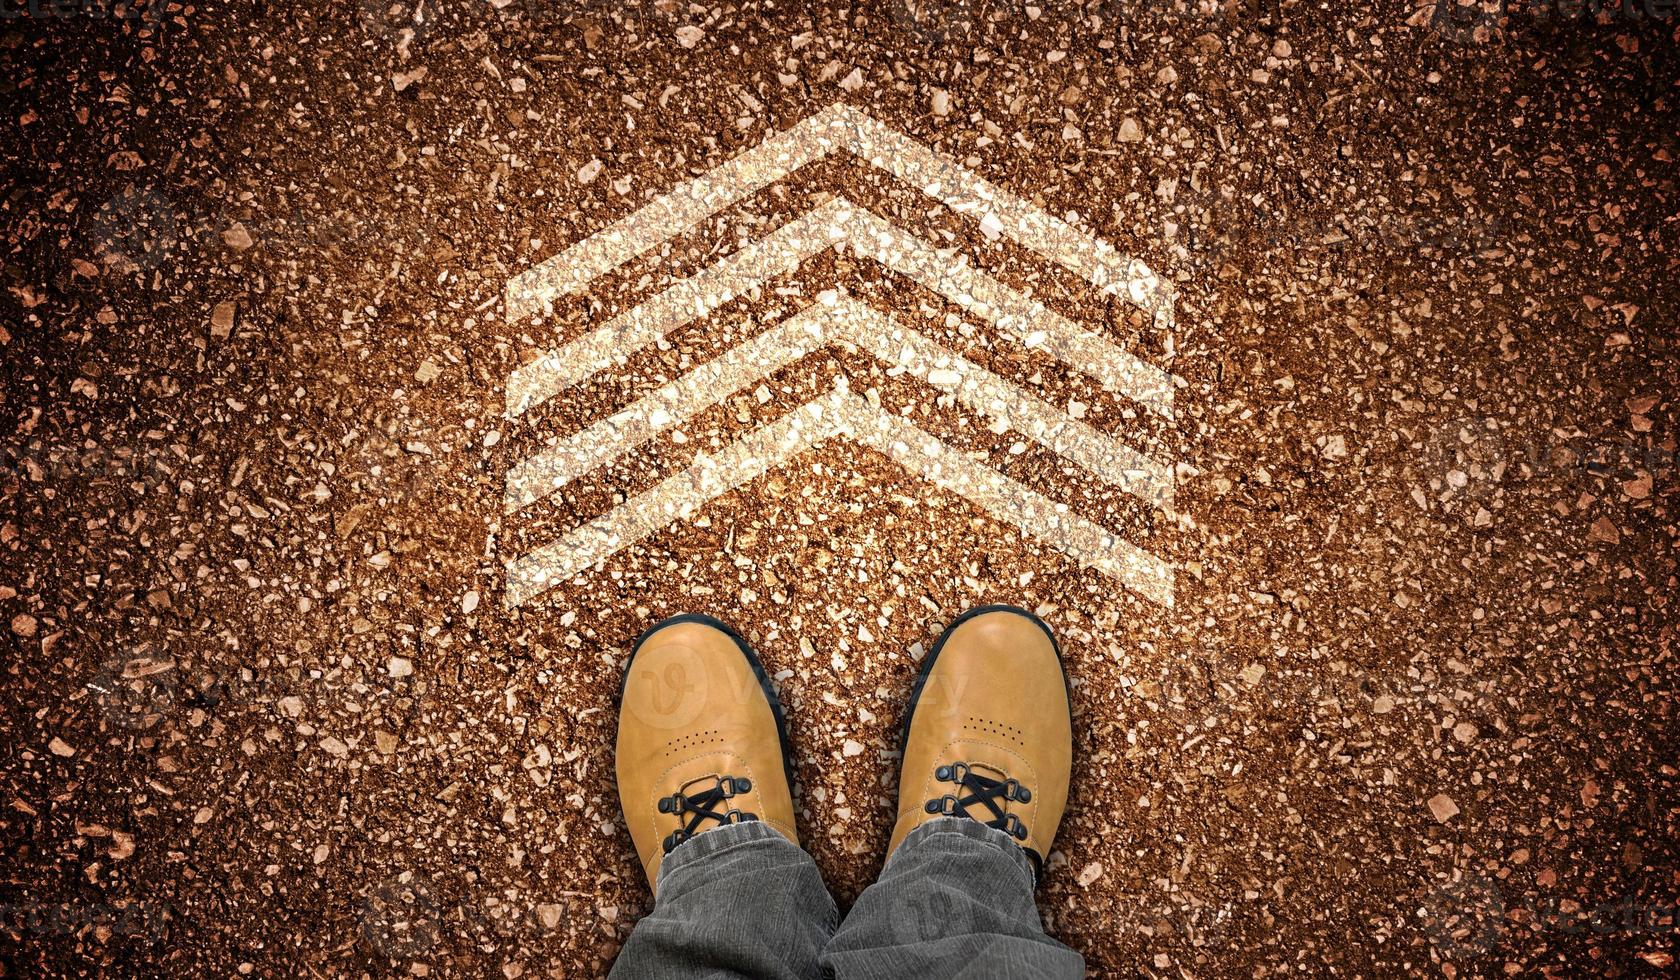 Yellow Leather Shoes and One Geometrical Chalky Arrow on Ground - Destination Concept photo